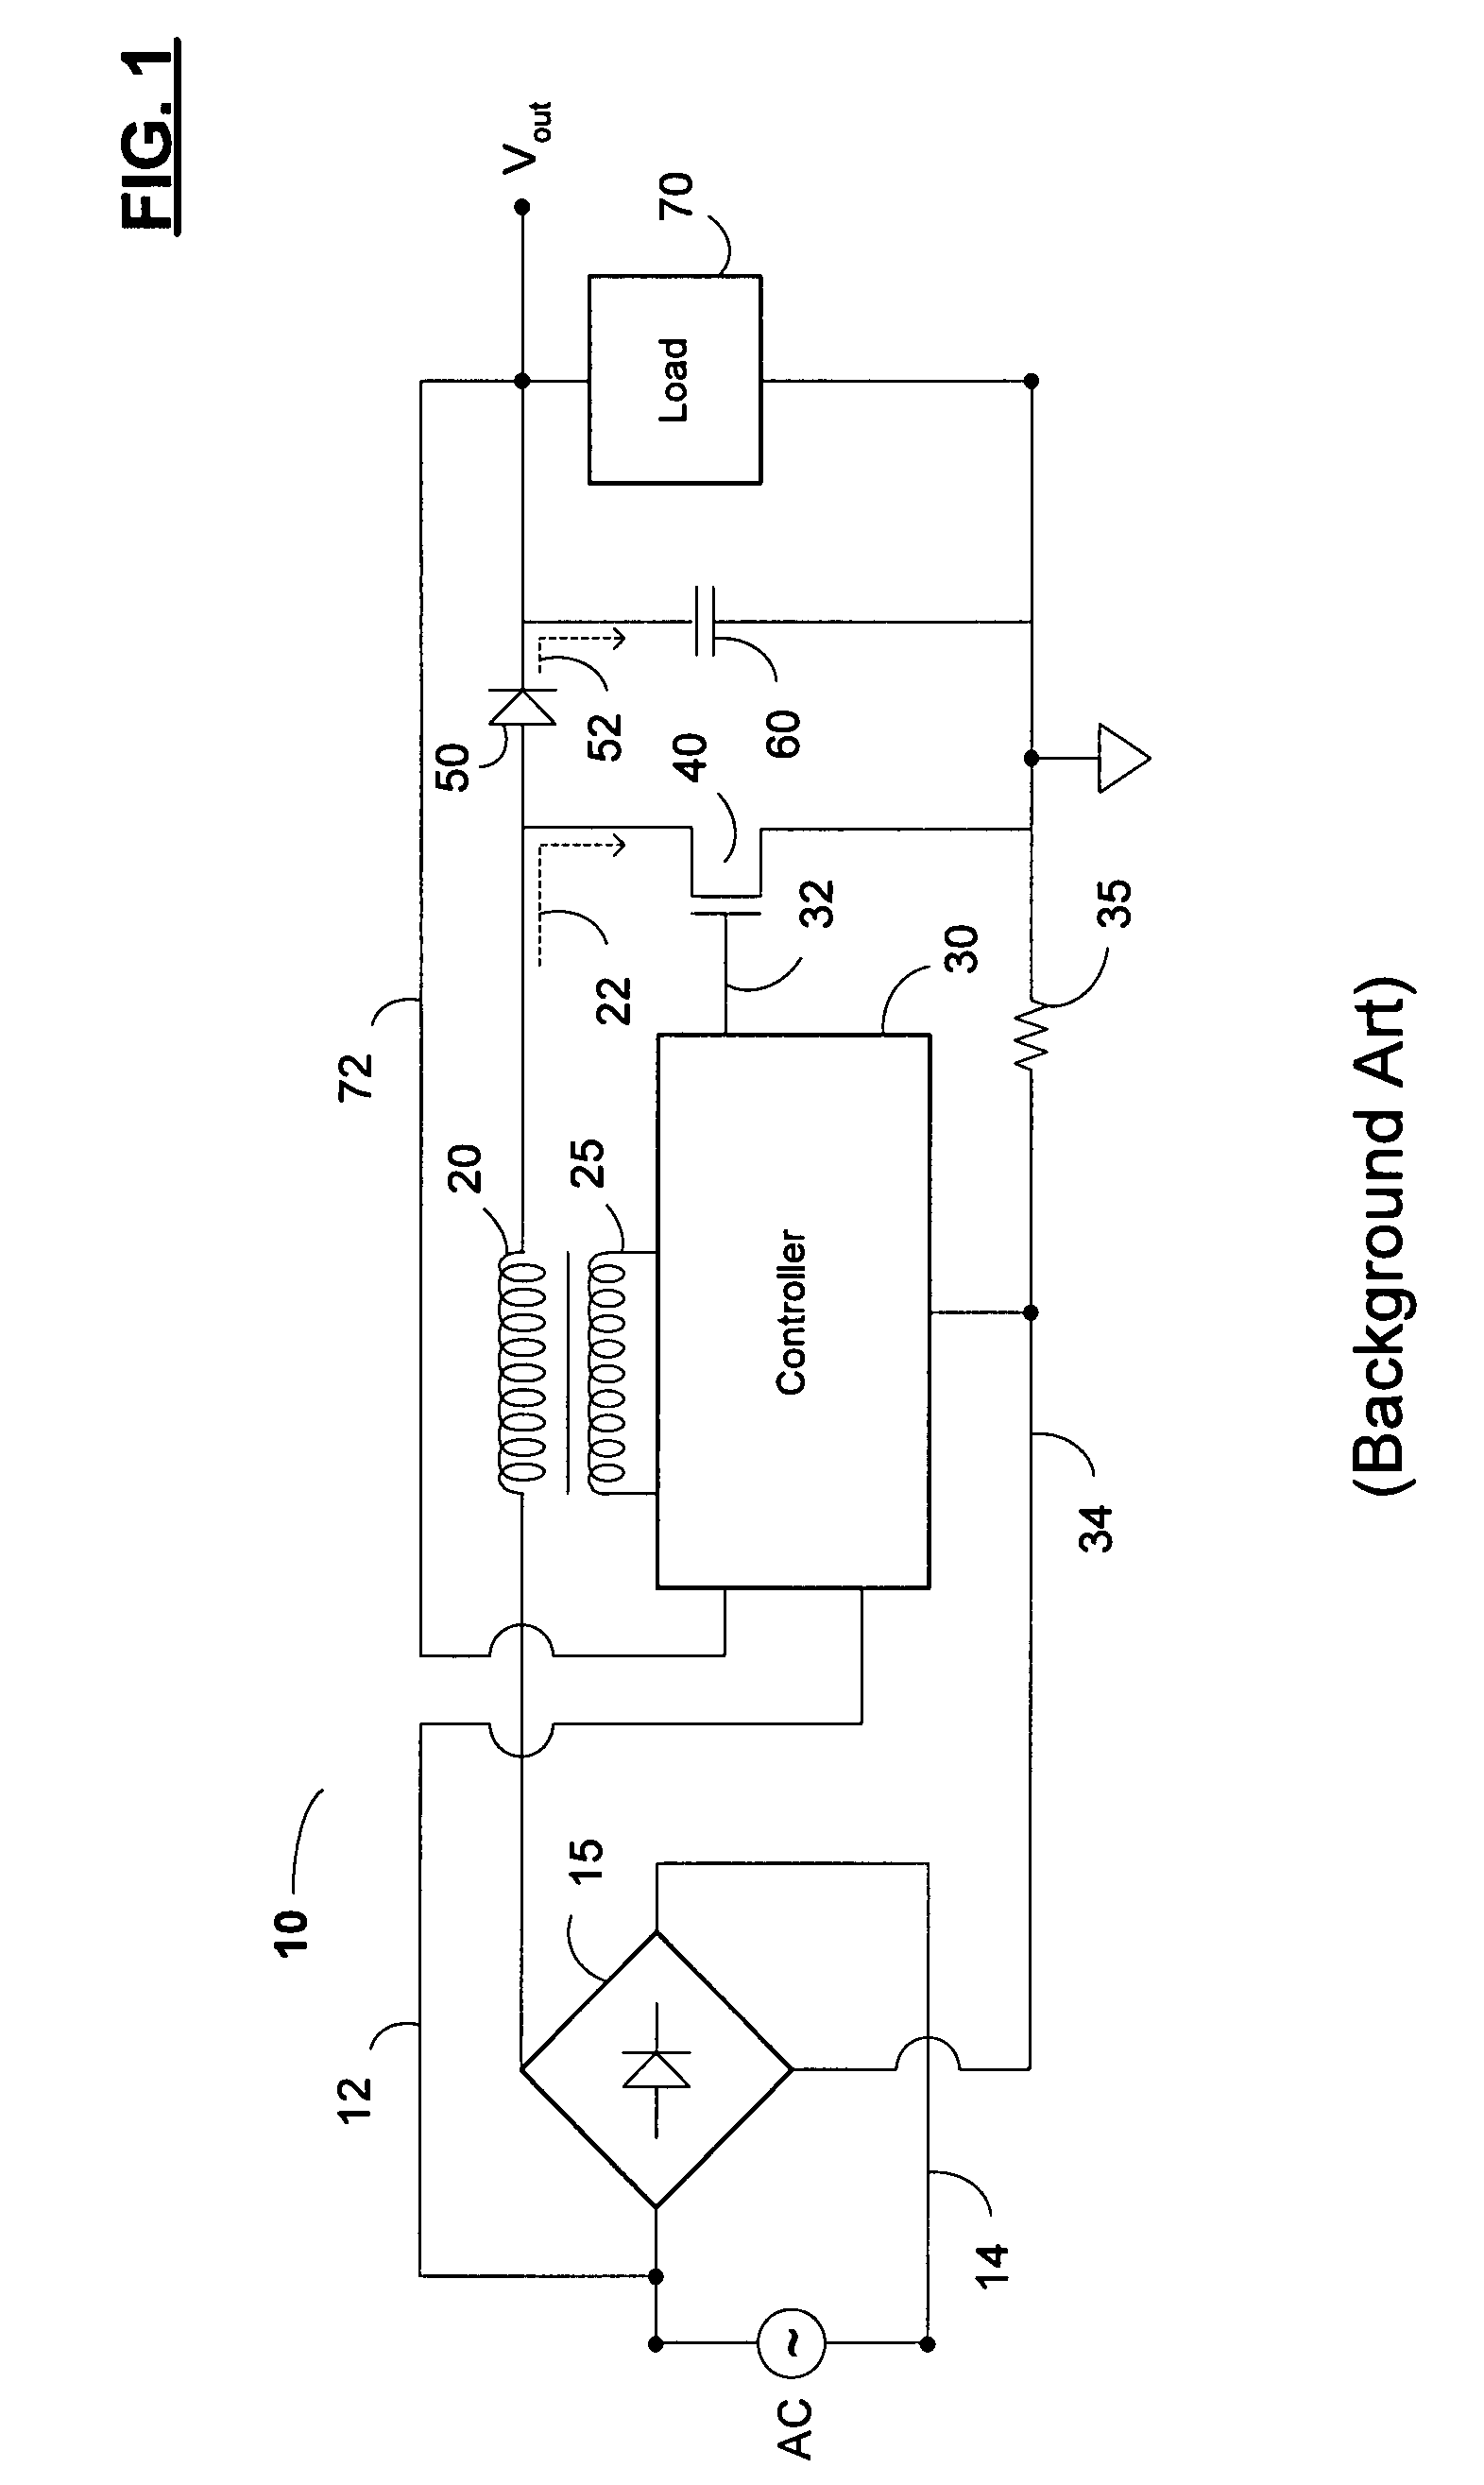 Circuits, systems, methods, and software for power factor correction and/or control